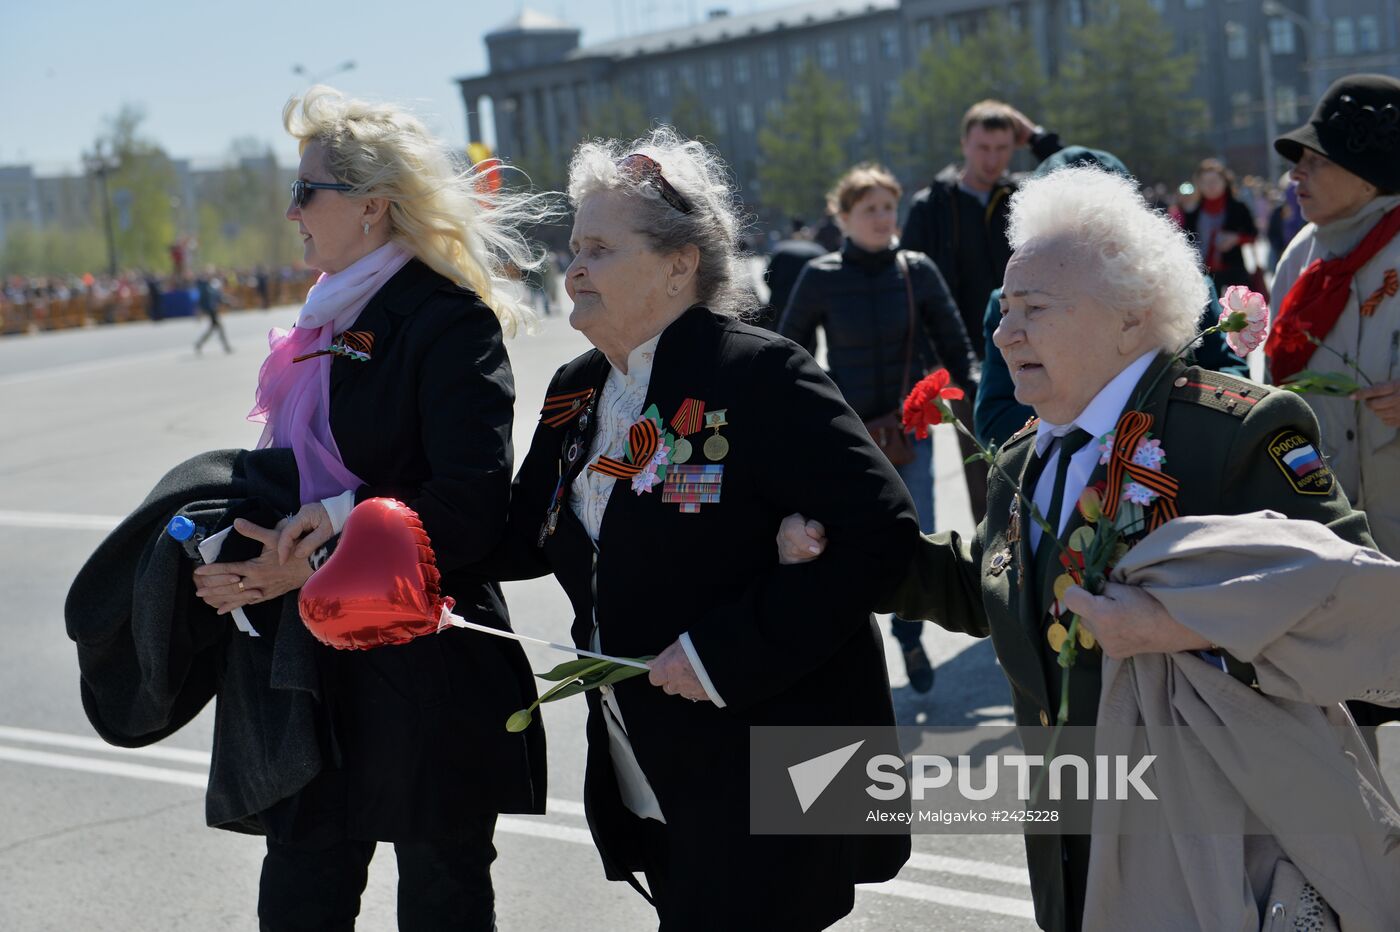 Victory Day celebrations across Russian regions